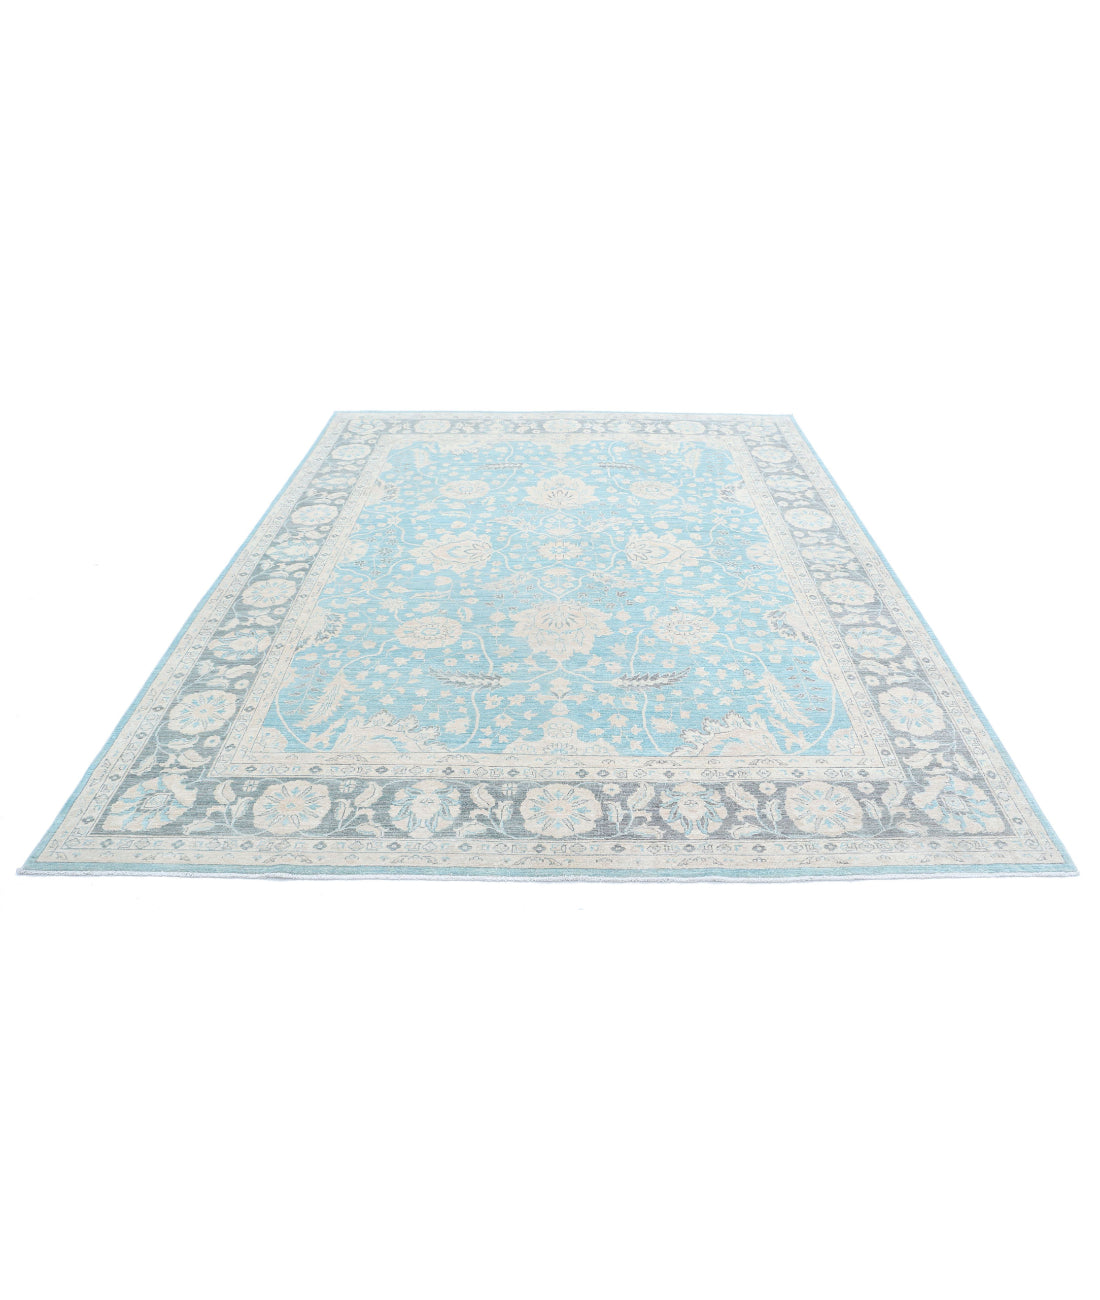 Hand Knotted Serenity Wool Rug - 7'11'' x 9'7'' 7'11'' x 9'7'' (238 X 288) / Blue / Grey